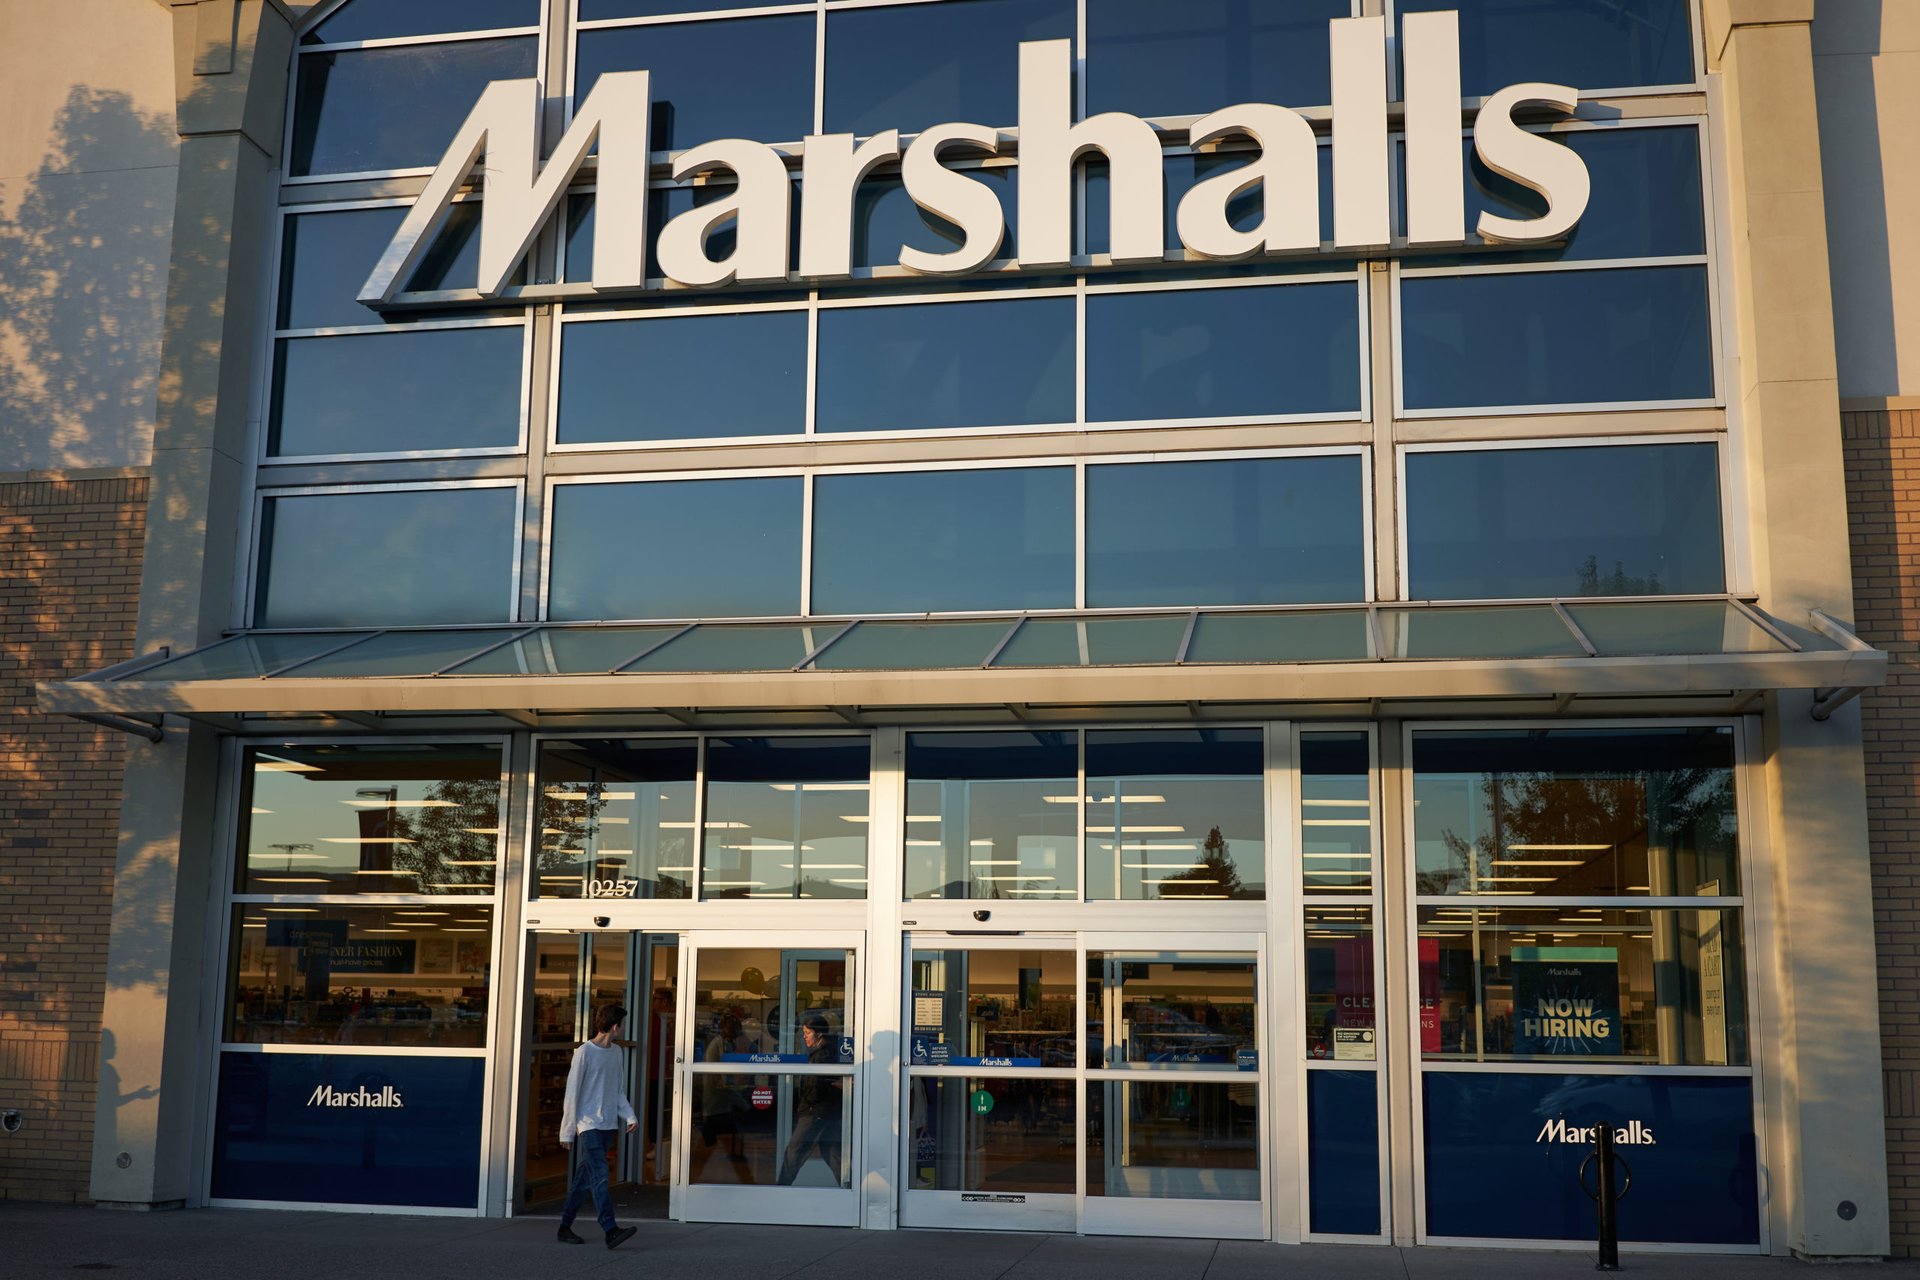 10 Tips To Save You Hundreds When Shopping at T.J.Maxx, HomeGoods &  Marshalls